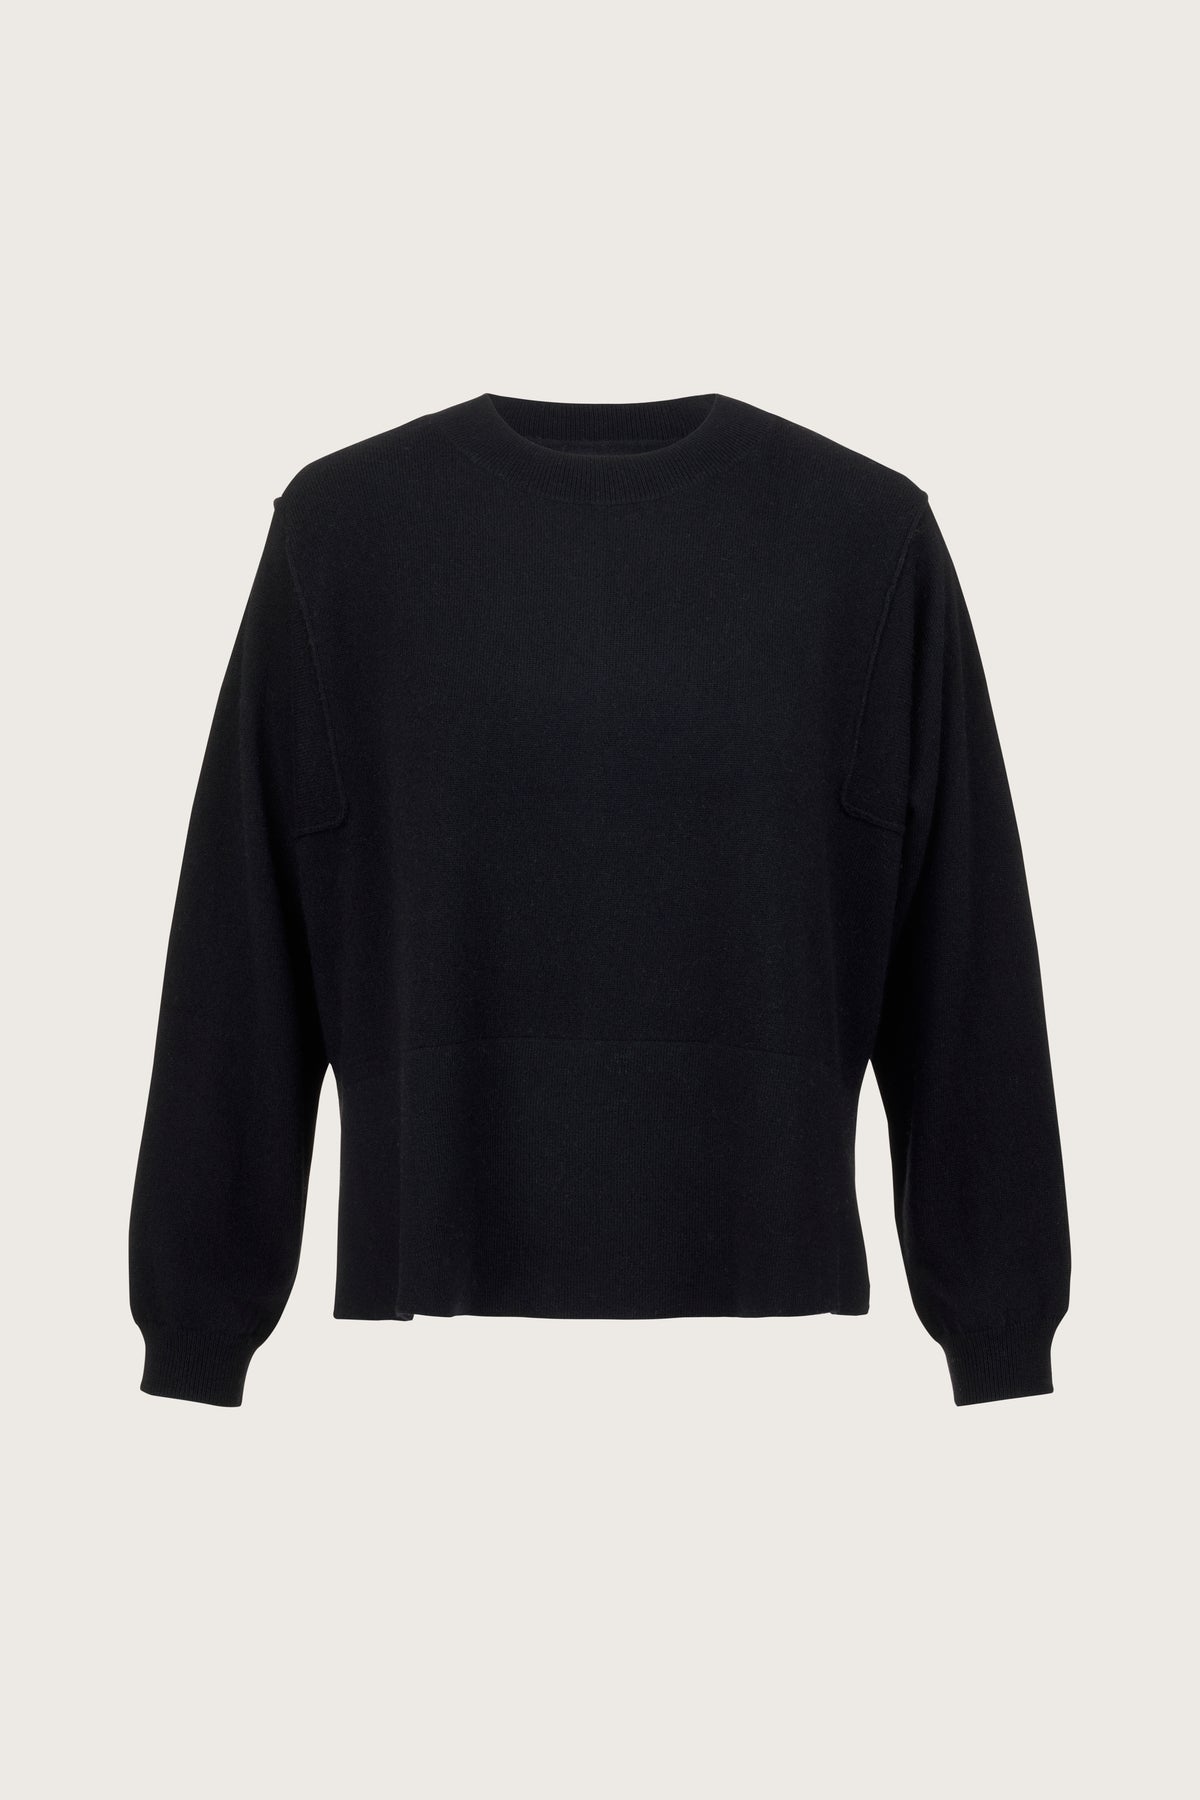 Black round neck cashmere jumper with square cut sleeves